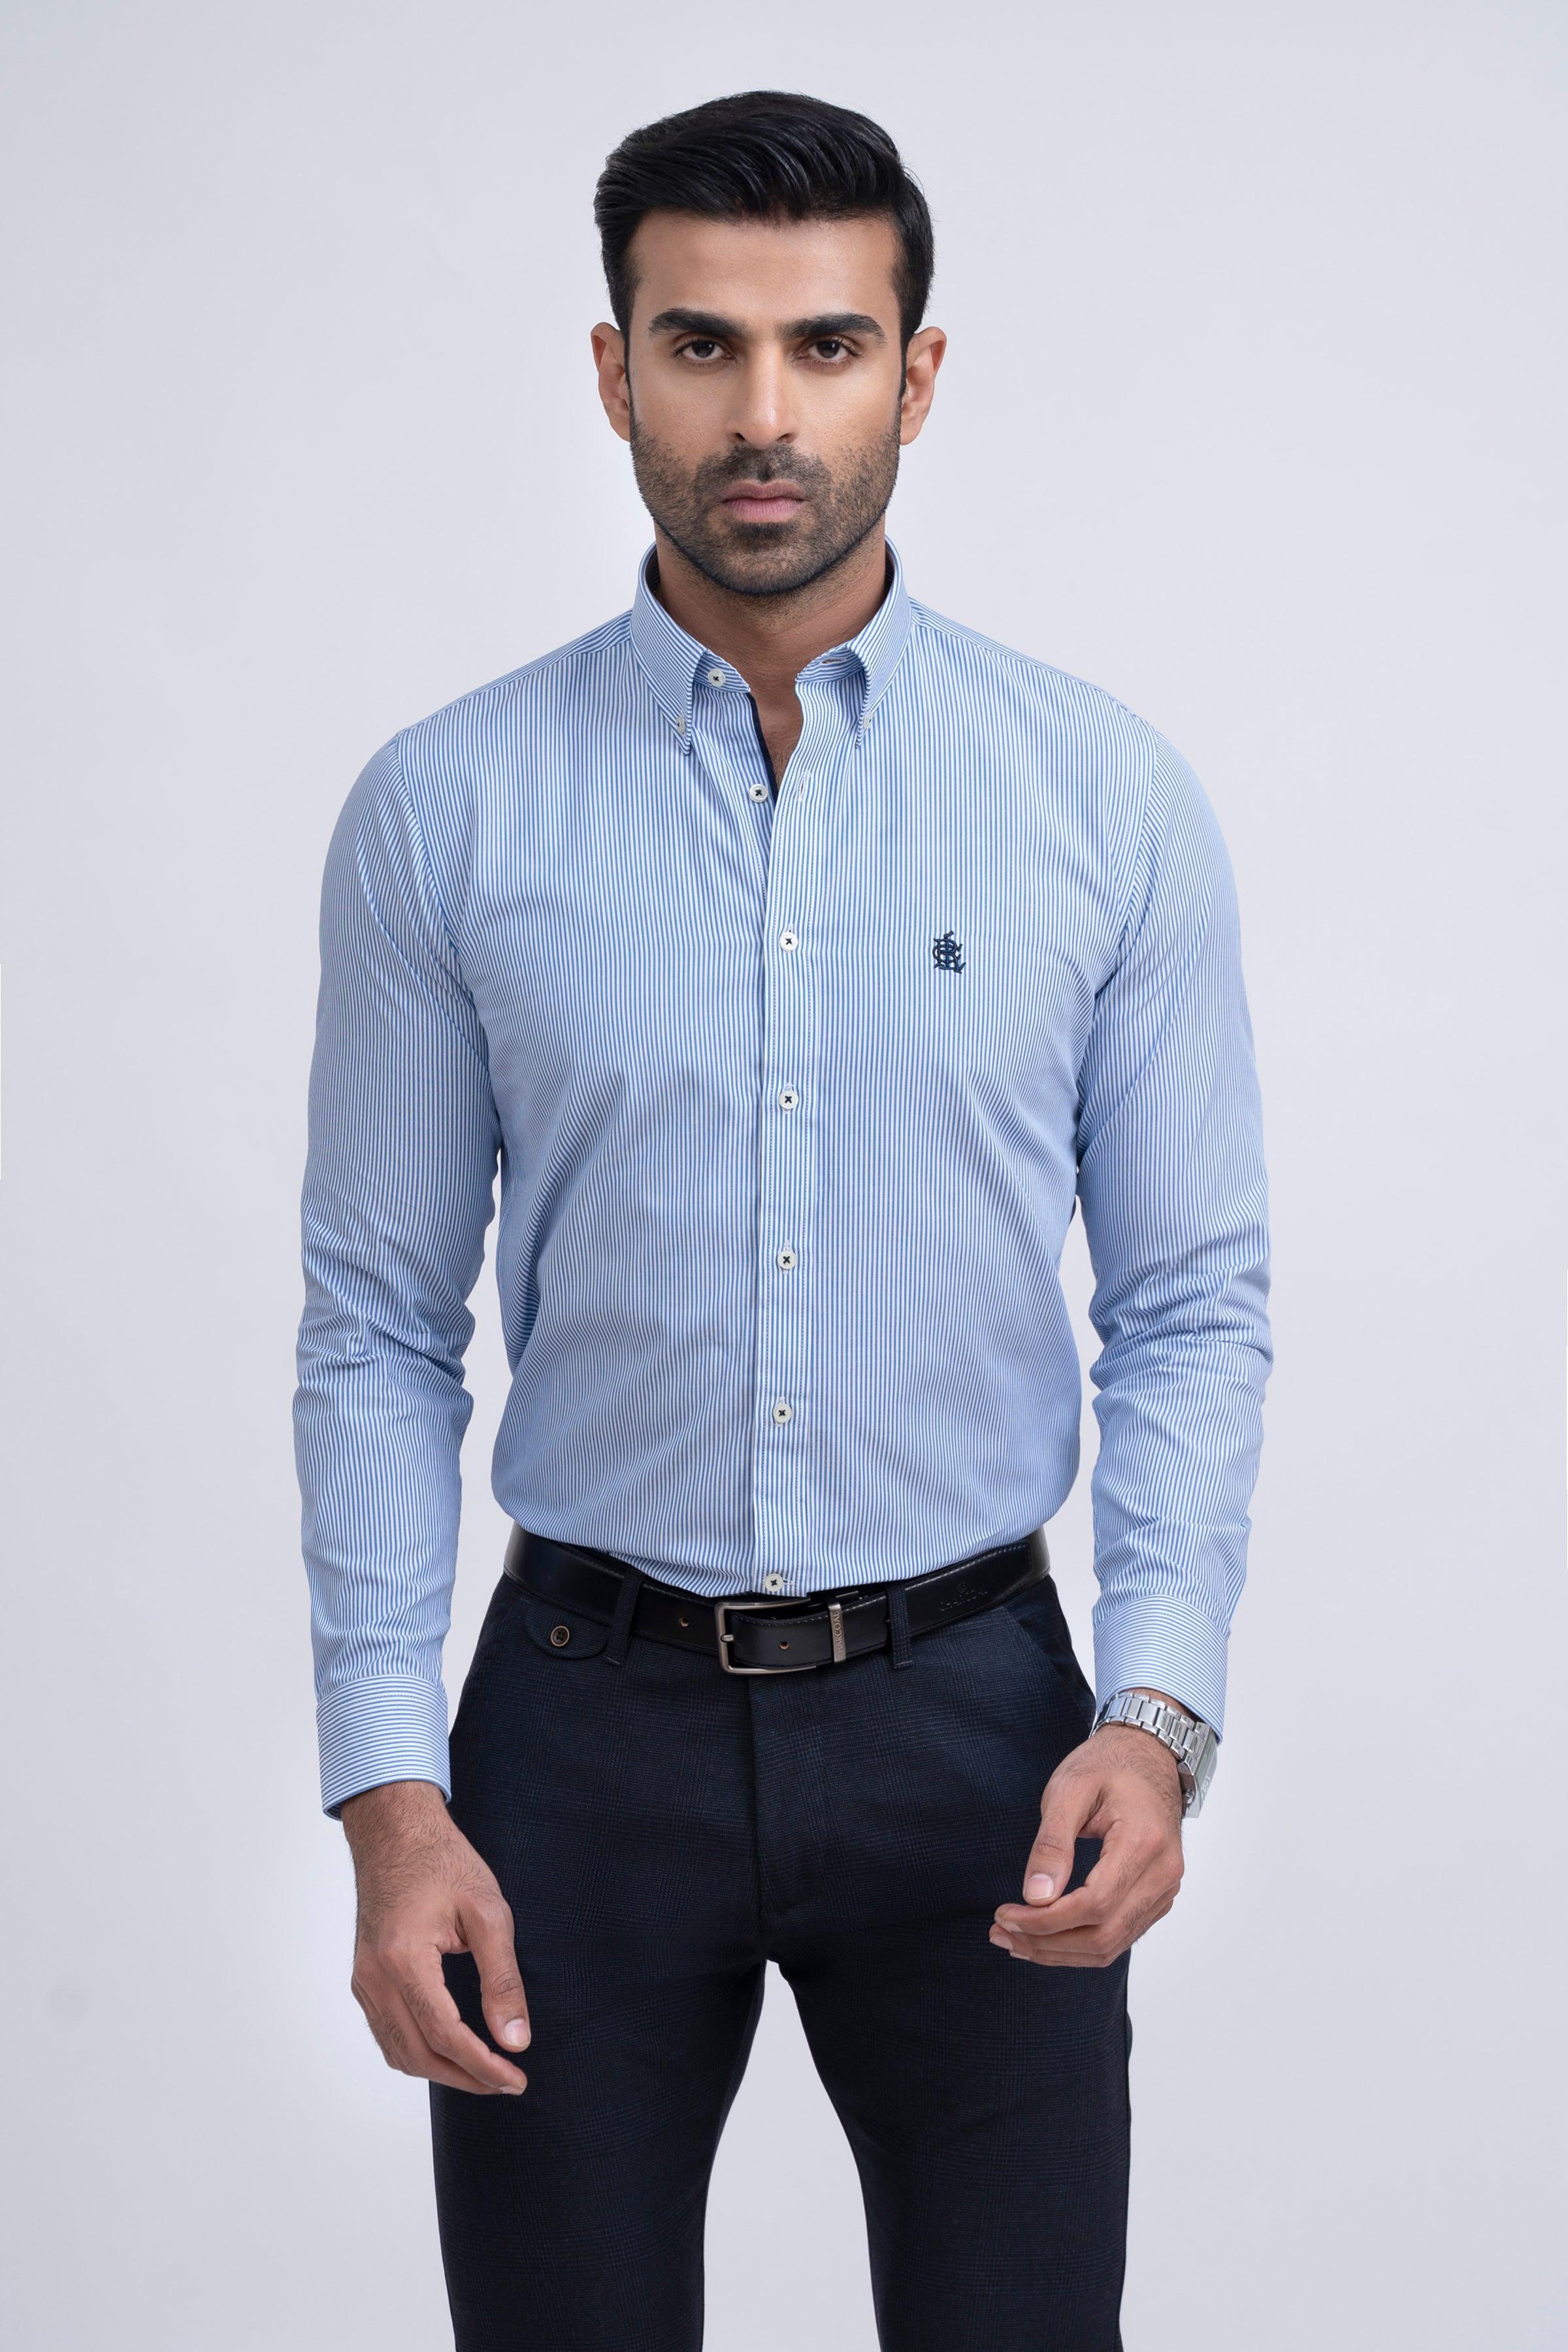 SEMI FORMAL SHIRT WHITE BLUE LINE at Charcoal Clothing